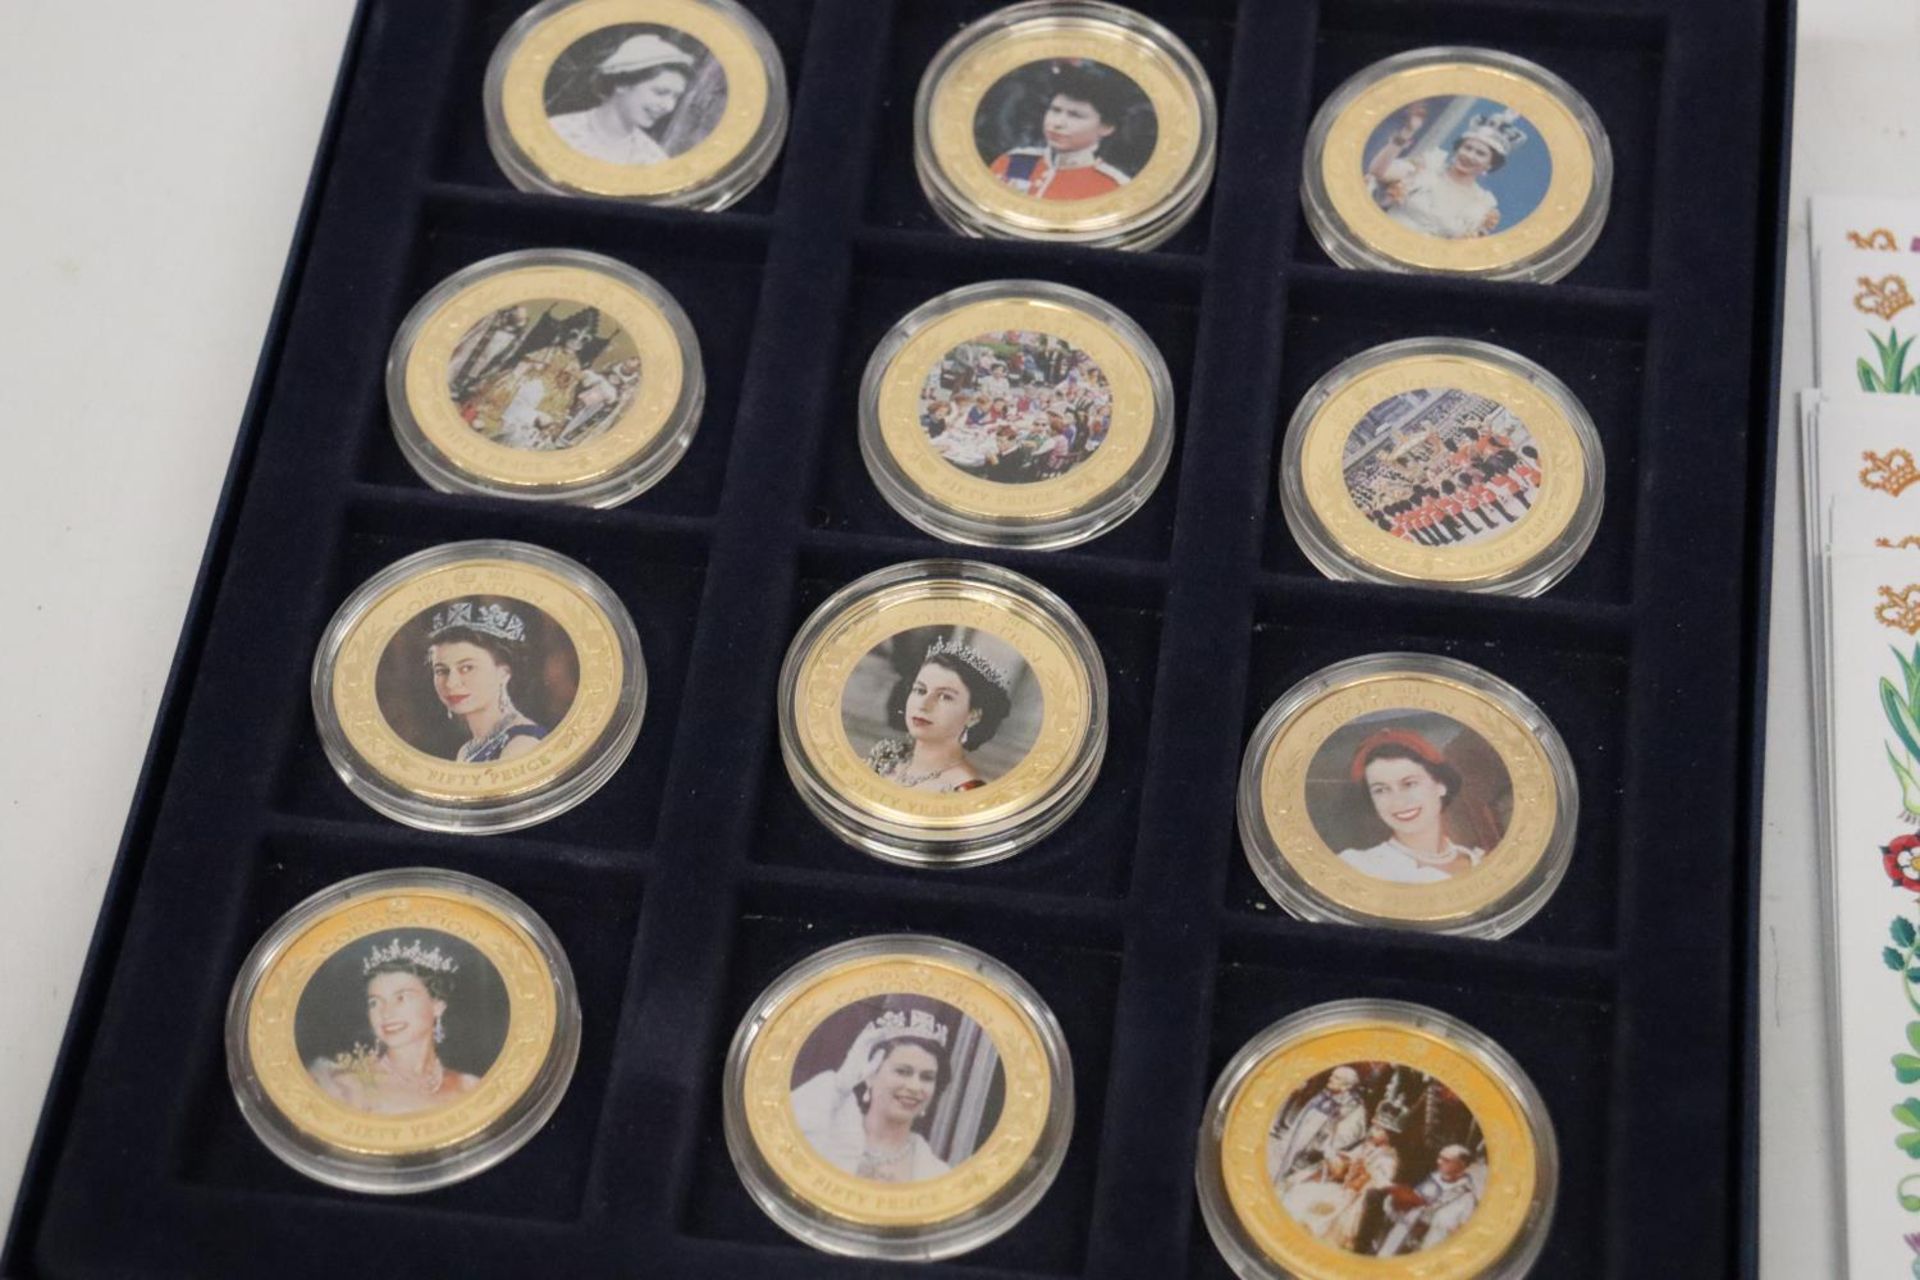 1953-2013 CORONATION JUBILEE OF HM QUEEN ELIZABETH 11, A SELECTION OF 16, 24 CARAT GOLD PLATED COINS - Bild 4 aus 5